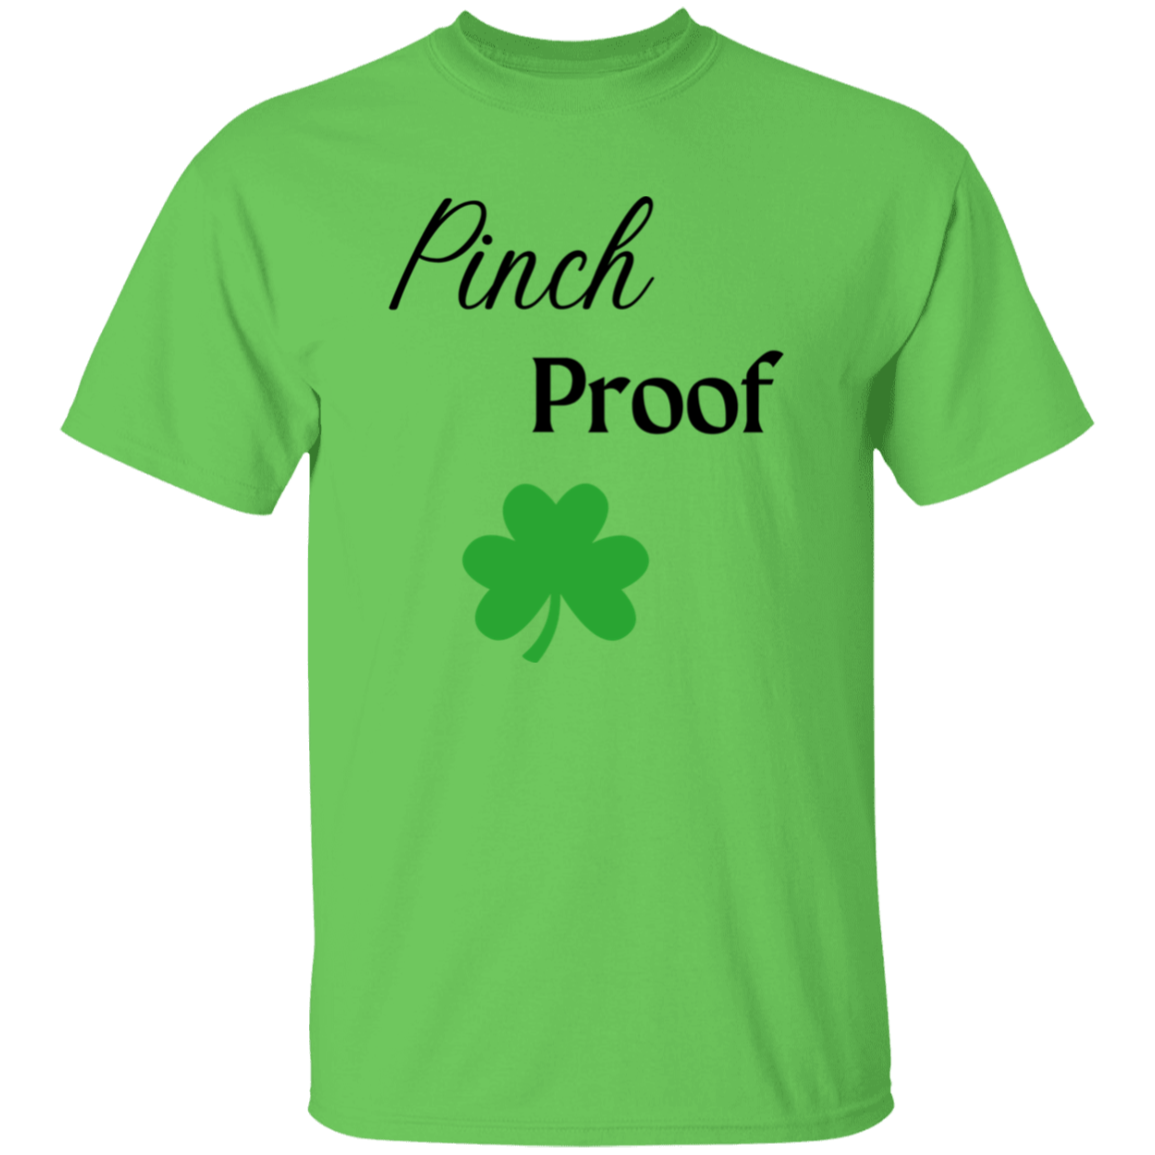 Youth Pinch Proof T-Shirt